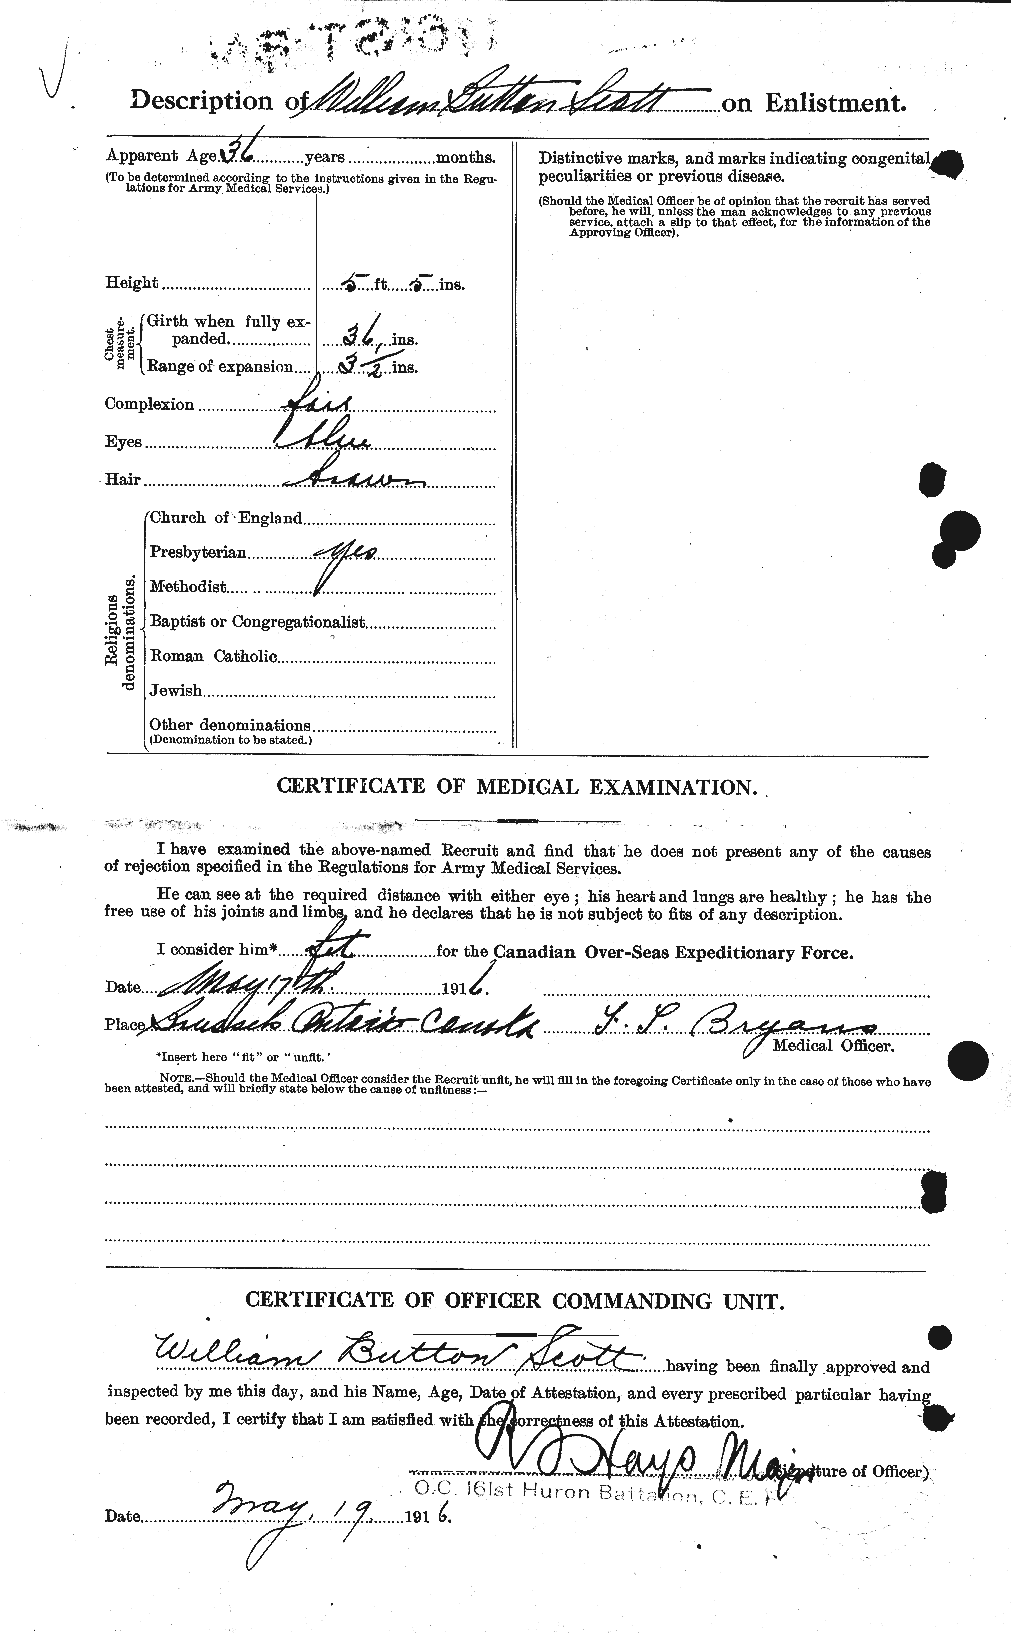 Personnel Records of the First World War - CEF 087046b